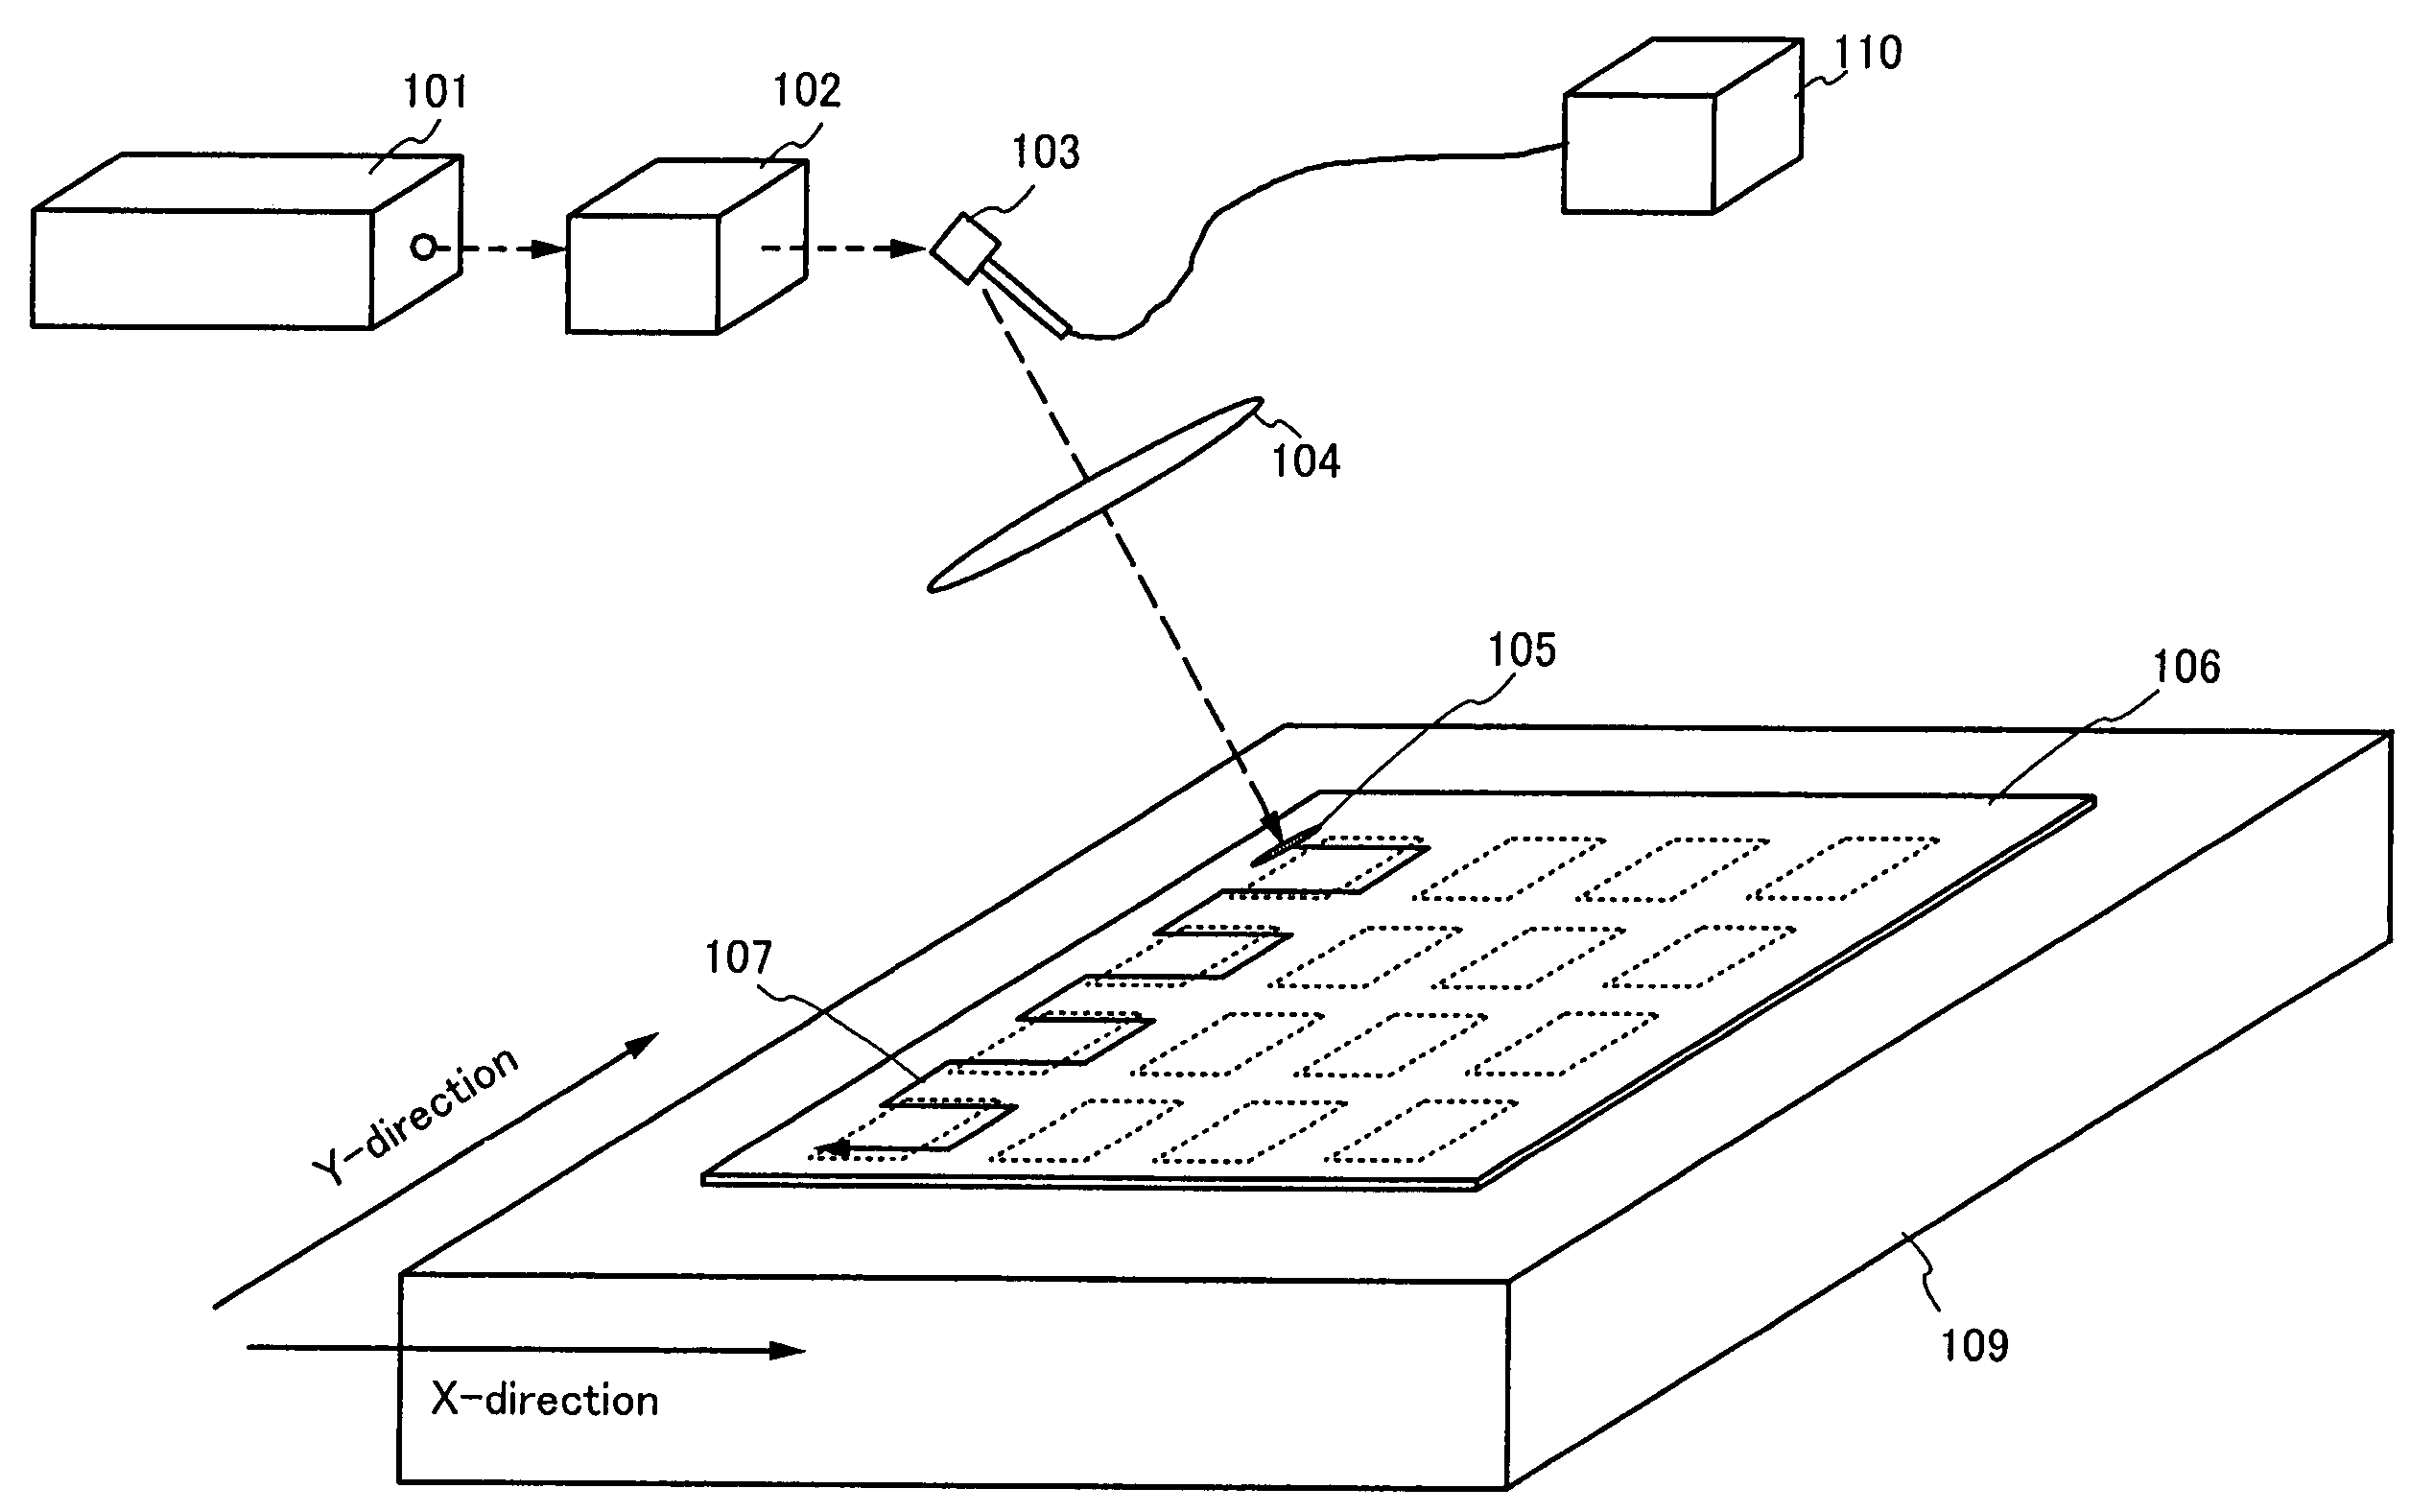 Method for manufacturing a semiconductor device where the scanning direction changes between regions during crystallization and process